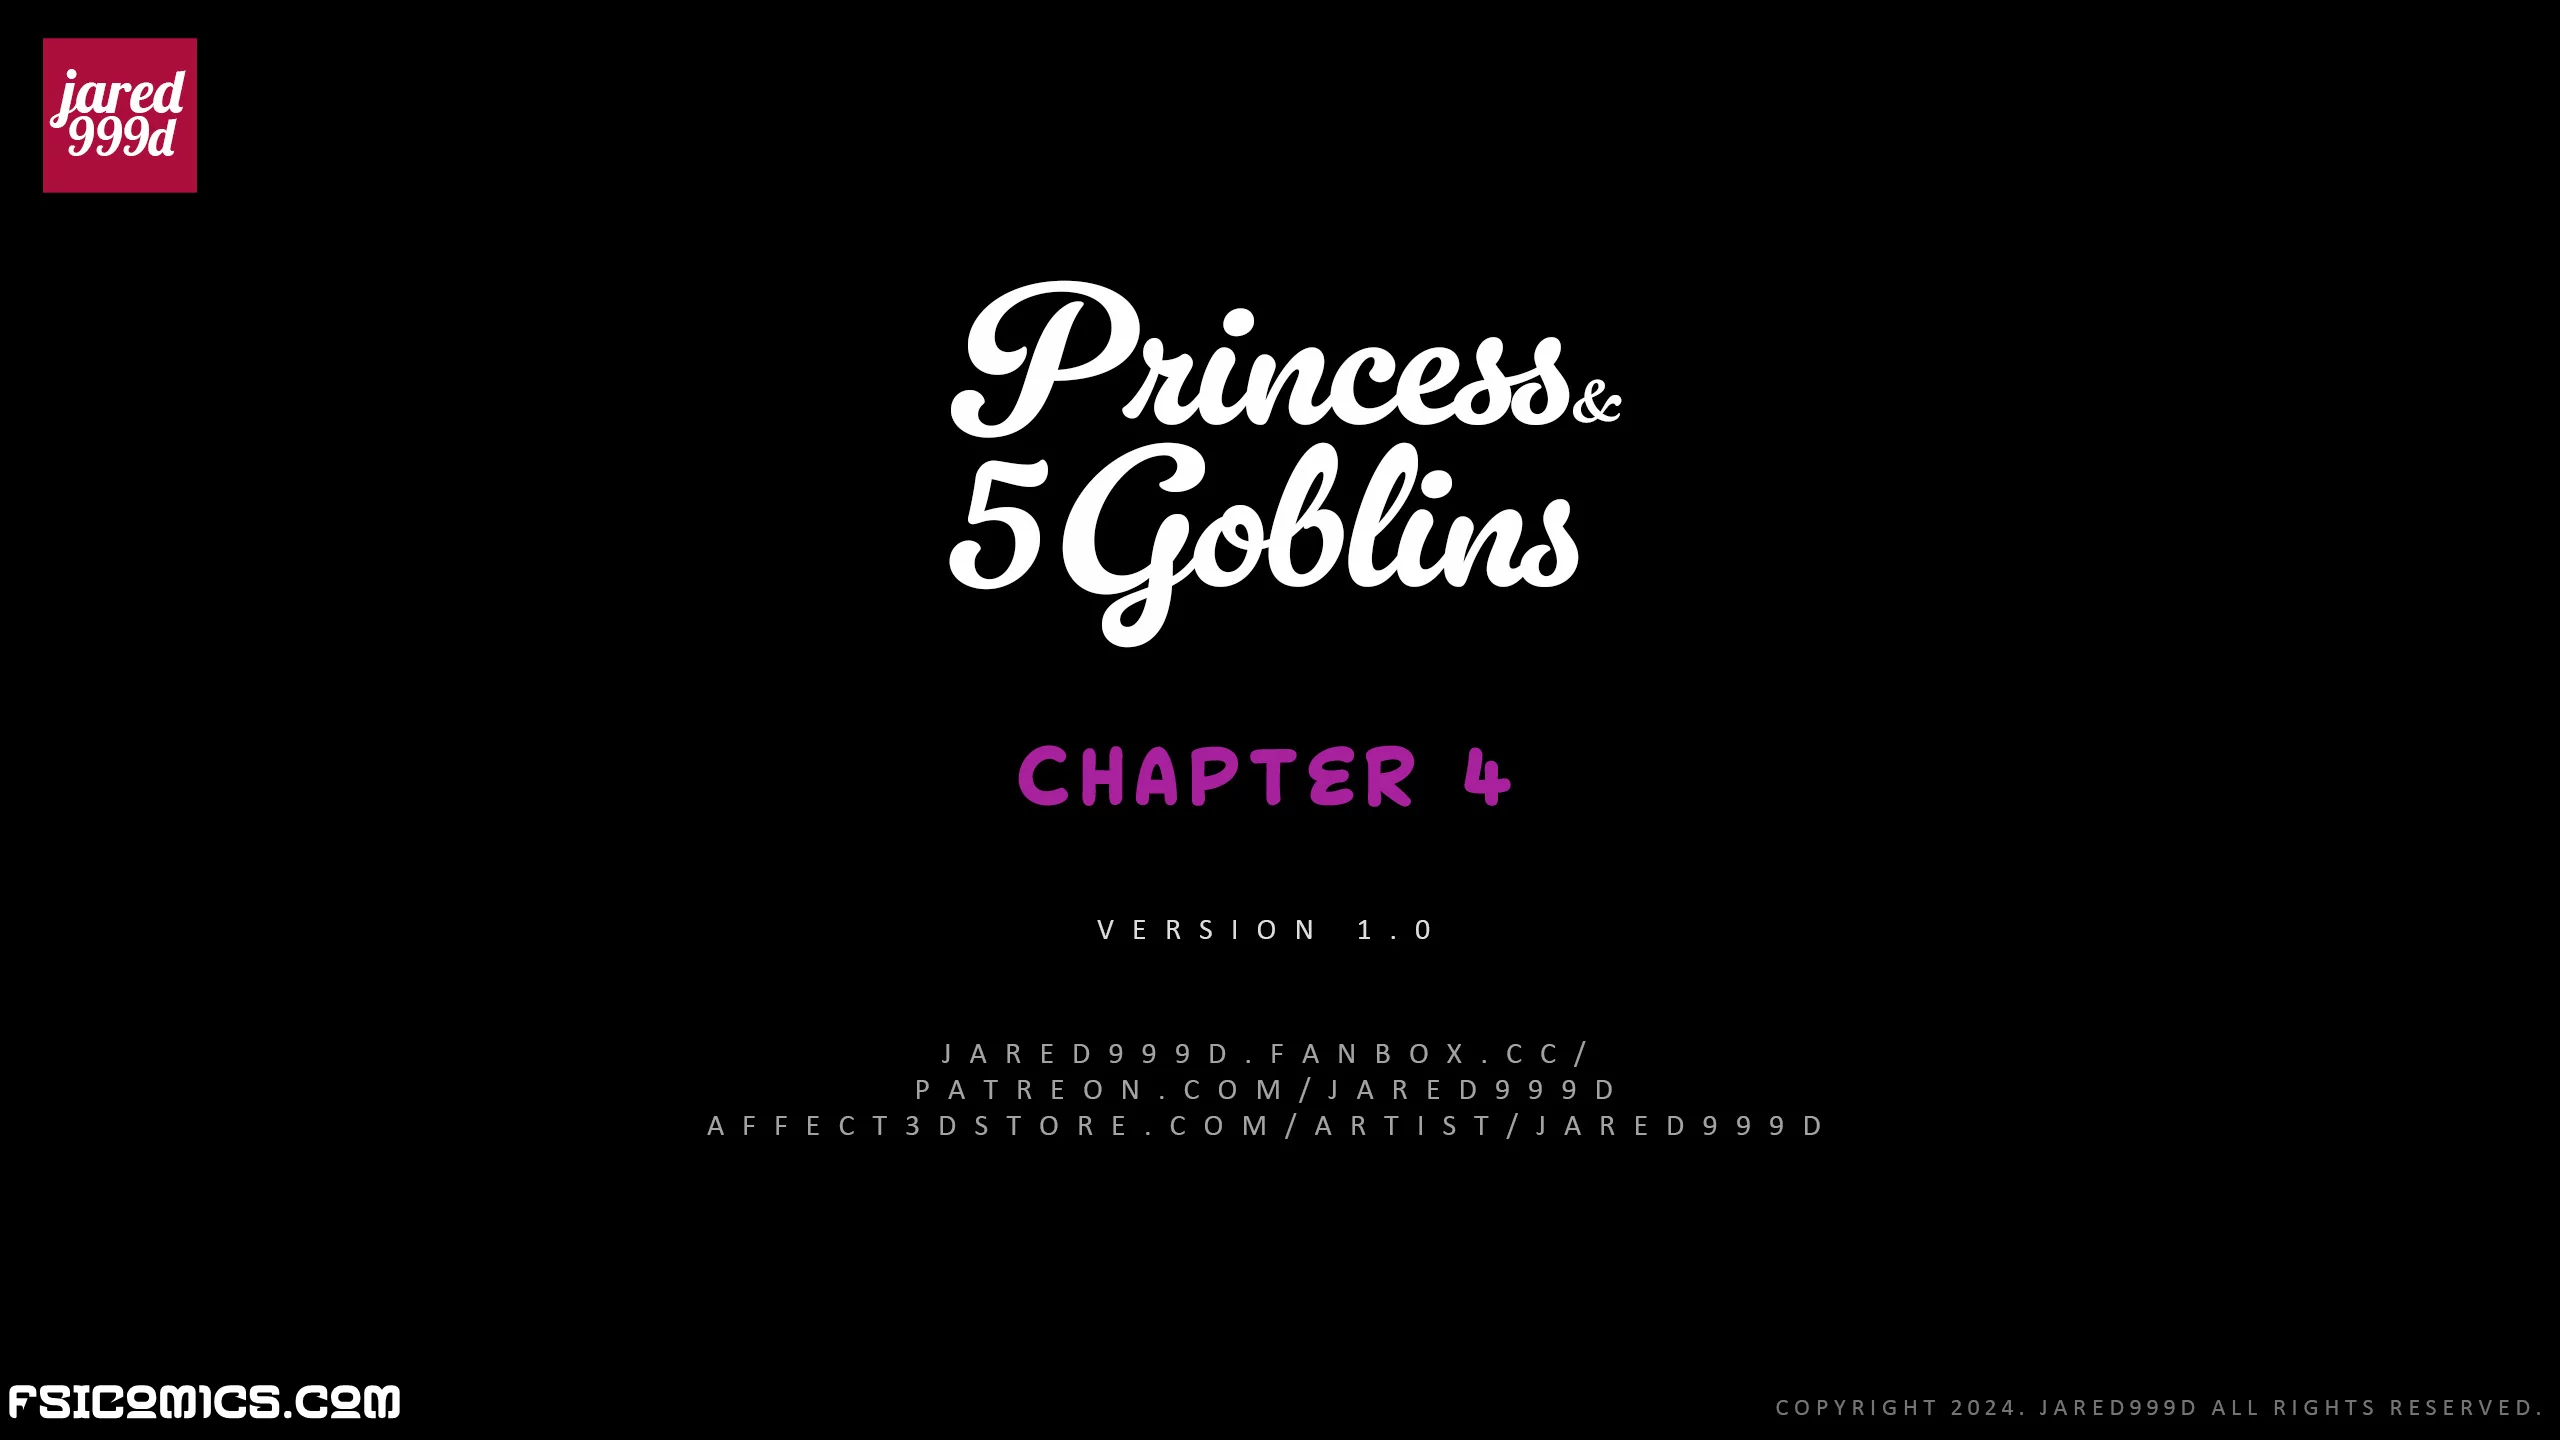 Princess And 5 Goblins Chapter 4 - Jared999D - 525 - FSIComics